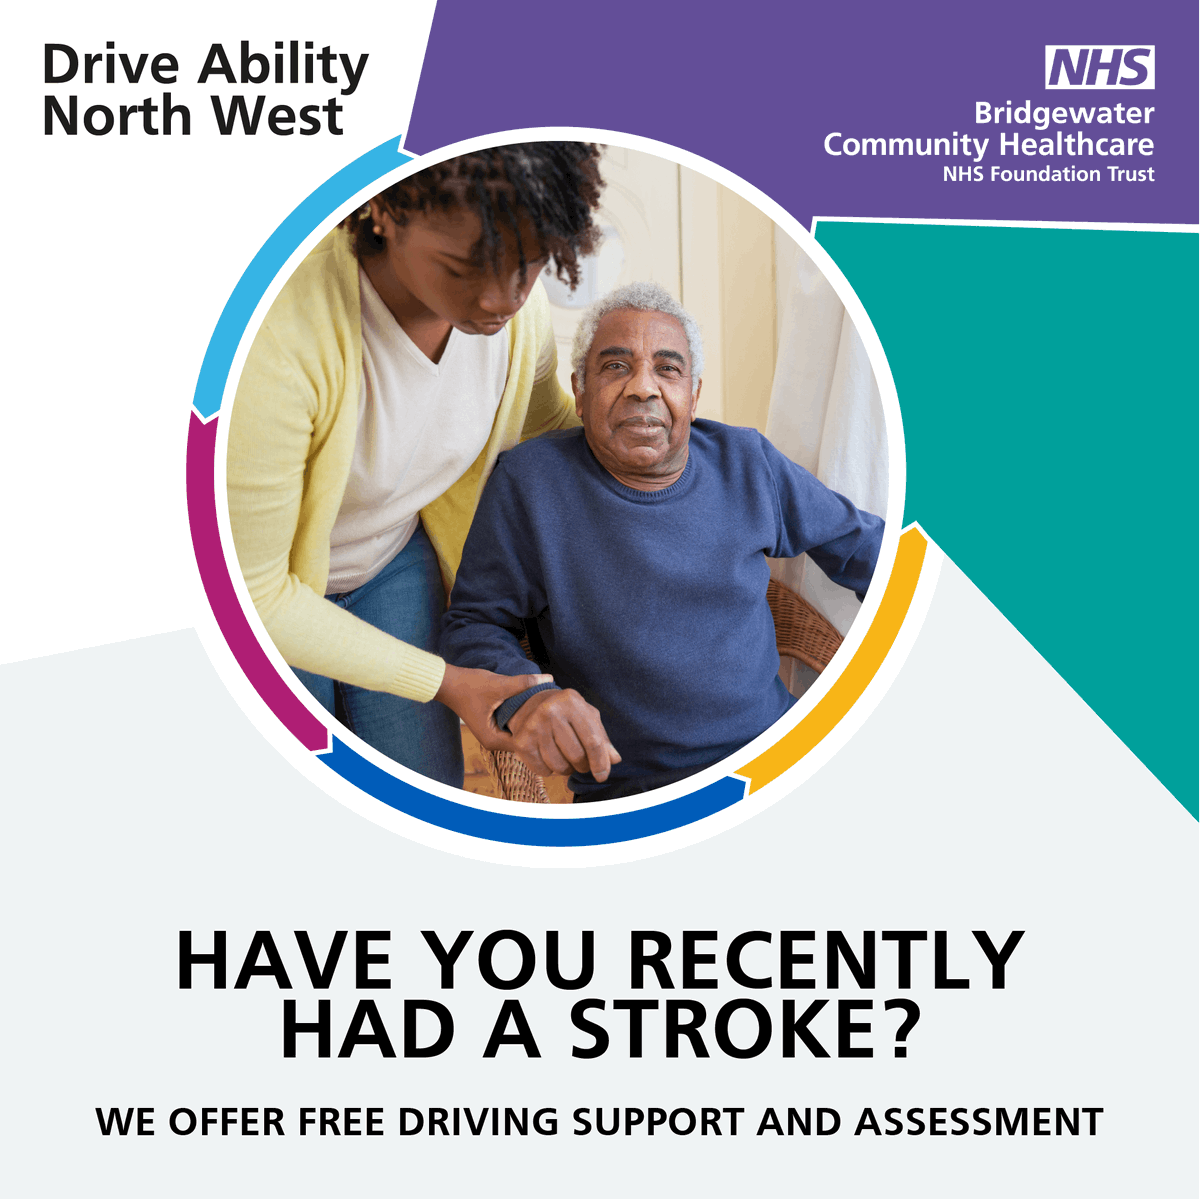 Need support getting back on the road after a #stroke? 🚘 

We can help ✅

For free driving support and assessment: 

📲 01942 483 713
💻bridgewater.nhs.uk/drive

#DrivingSafety #DrivingAssessments @DrivingMob